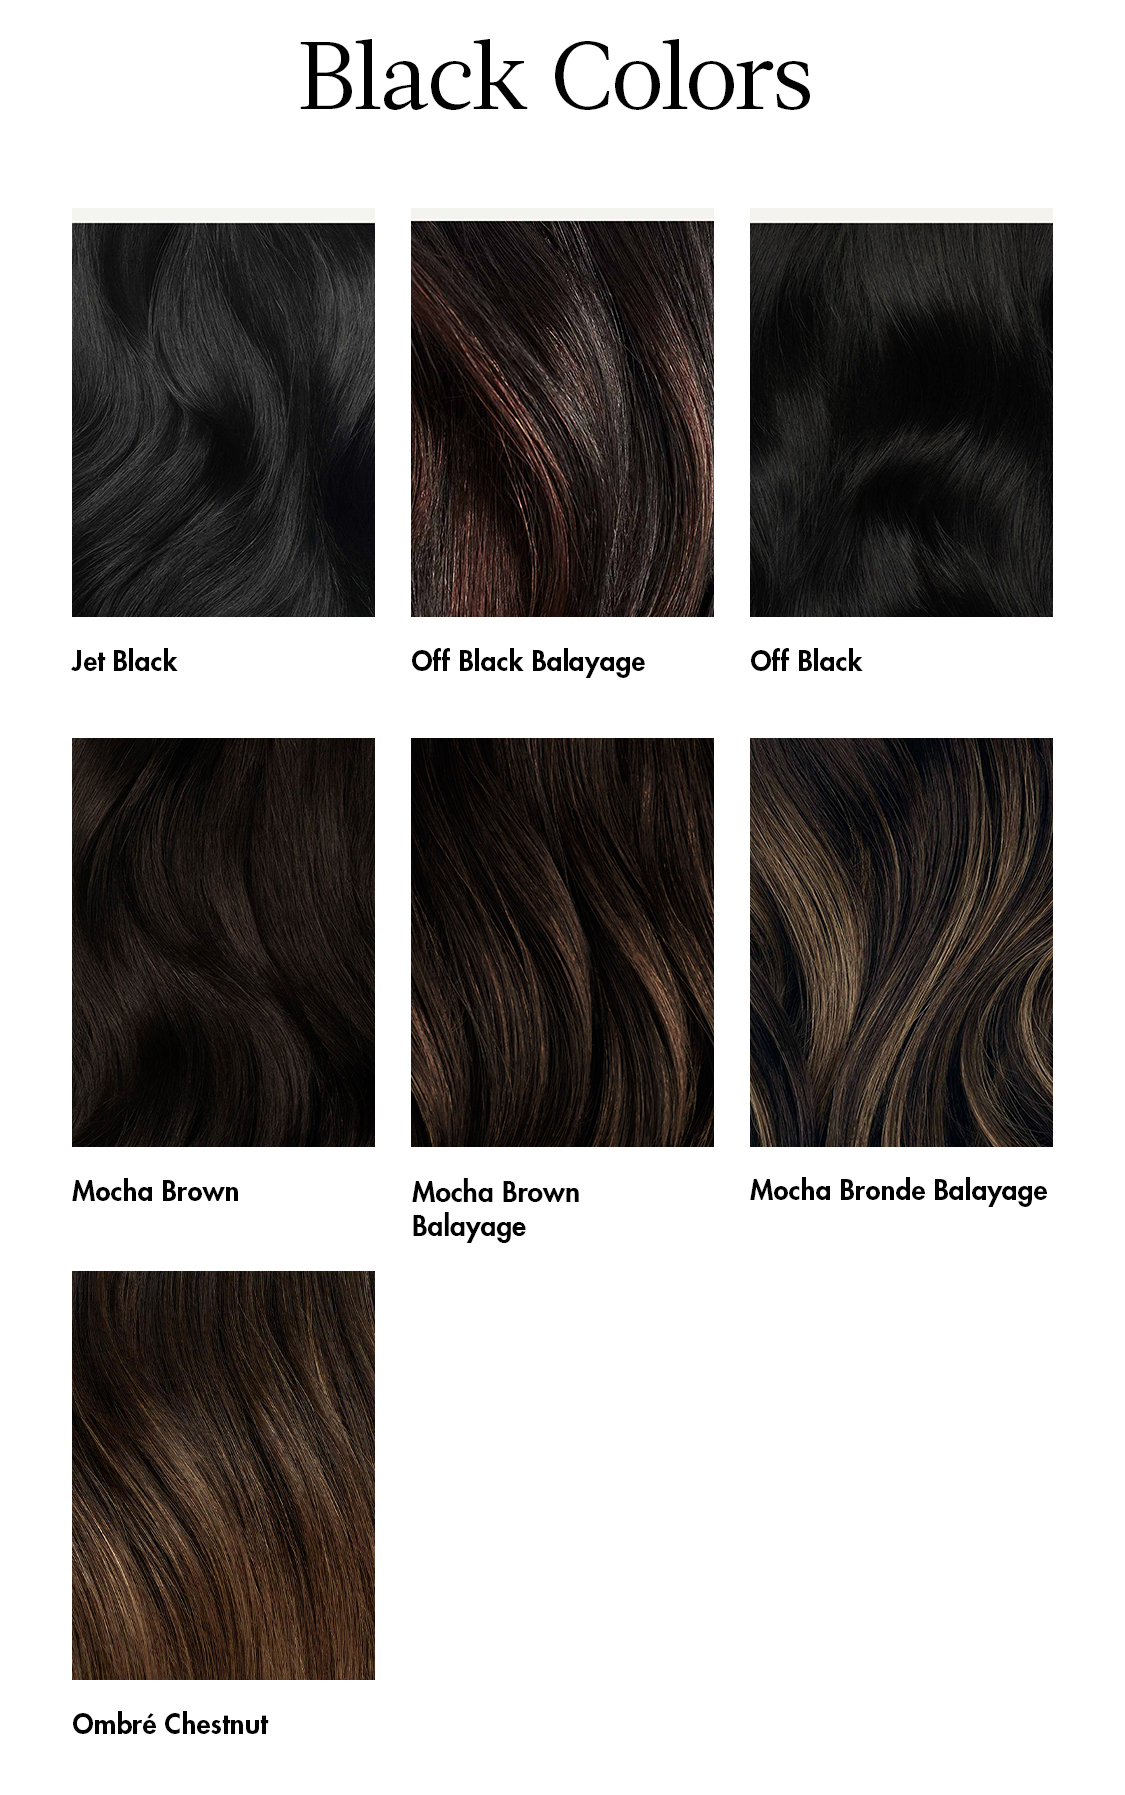 How Do I Choose The Right Color Of Black Extensions Luxy Hair Support